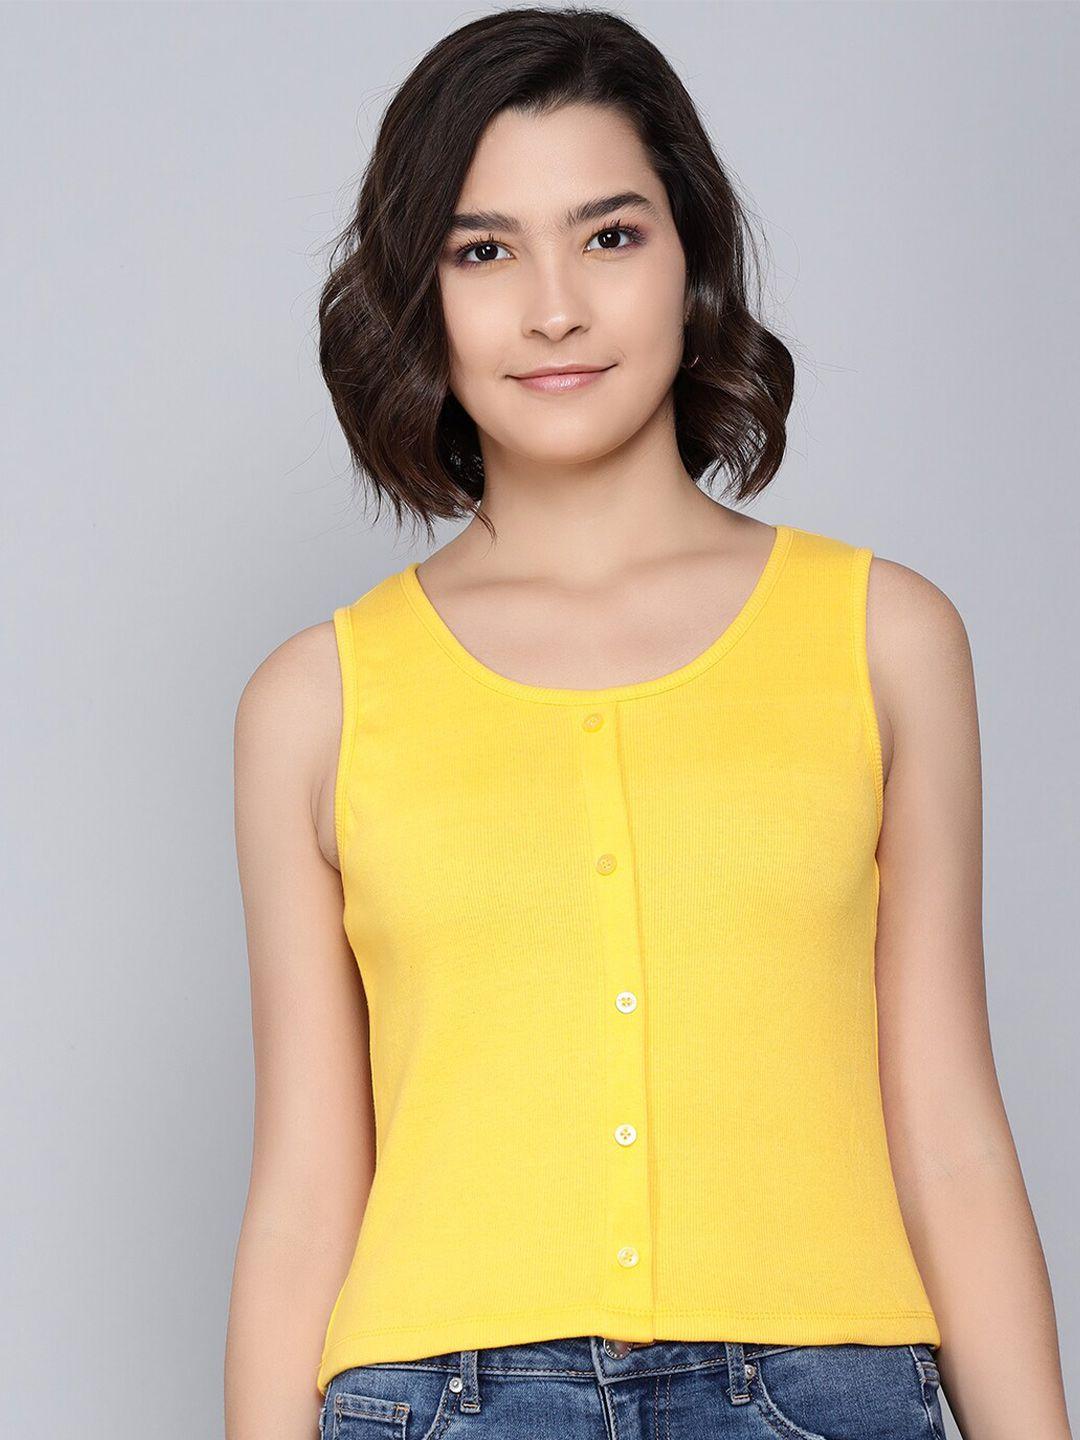 q-rious yellow top